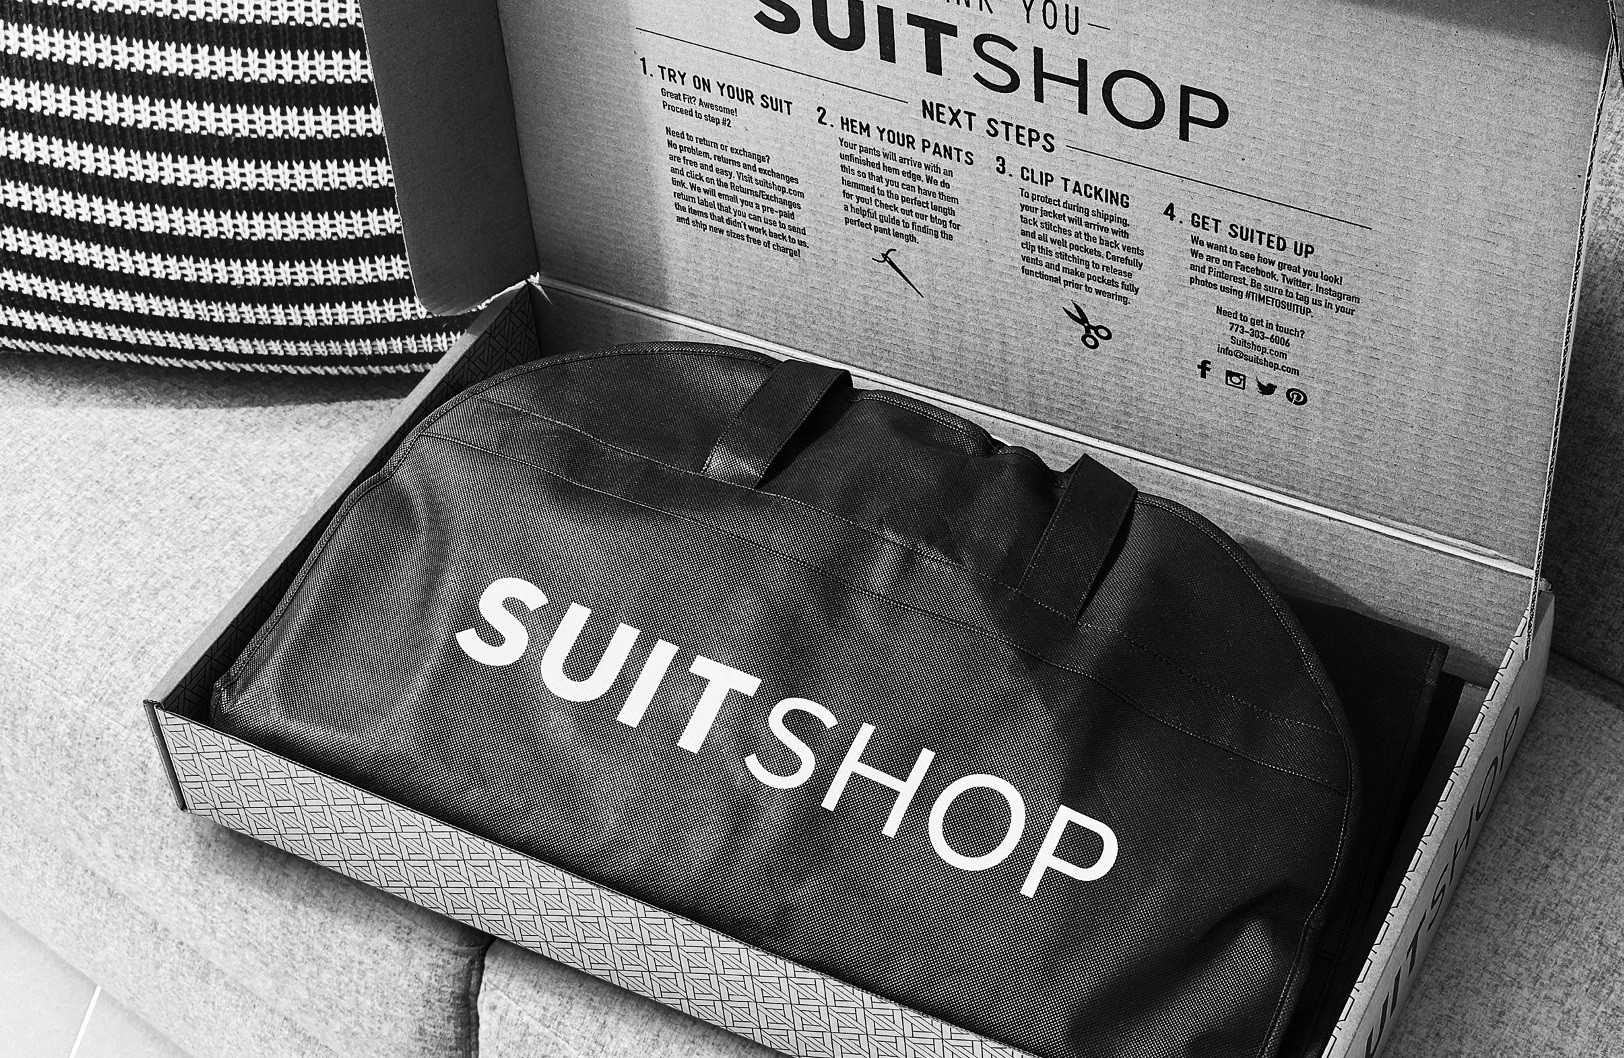 SuitShop delivery box open showing written next steps and suit garment bag in black and white.